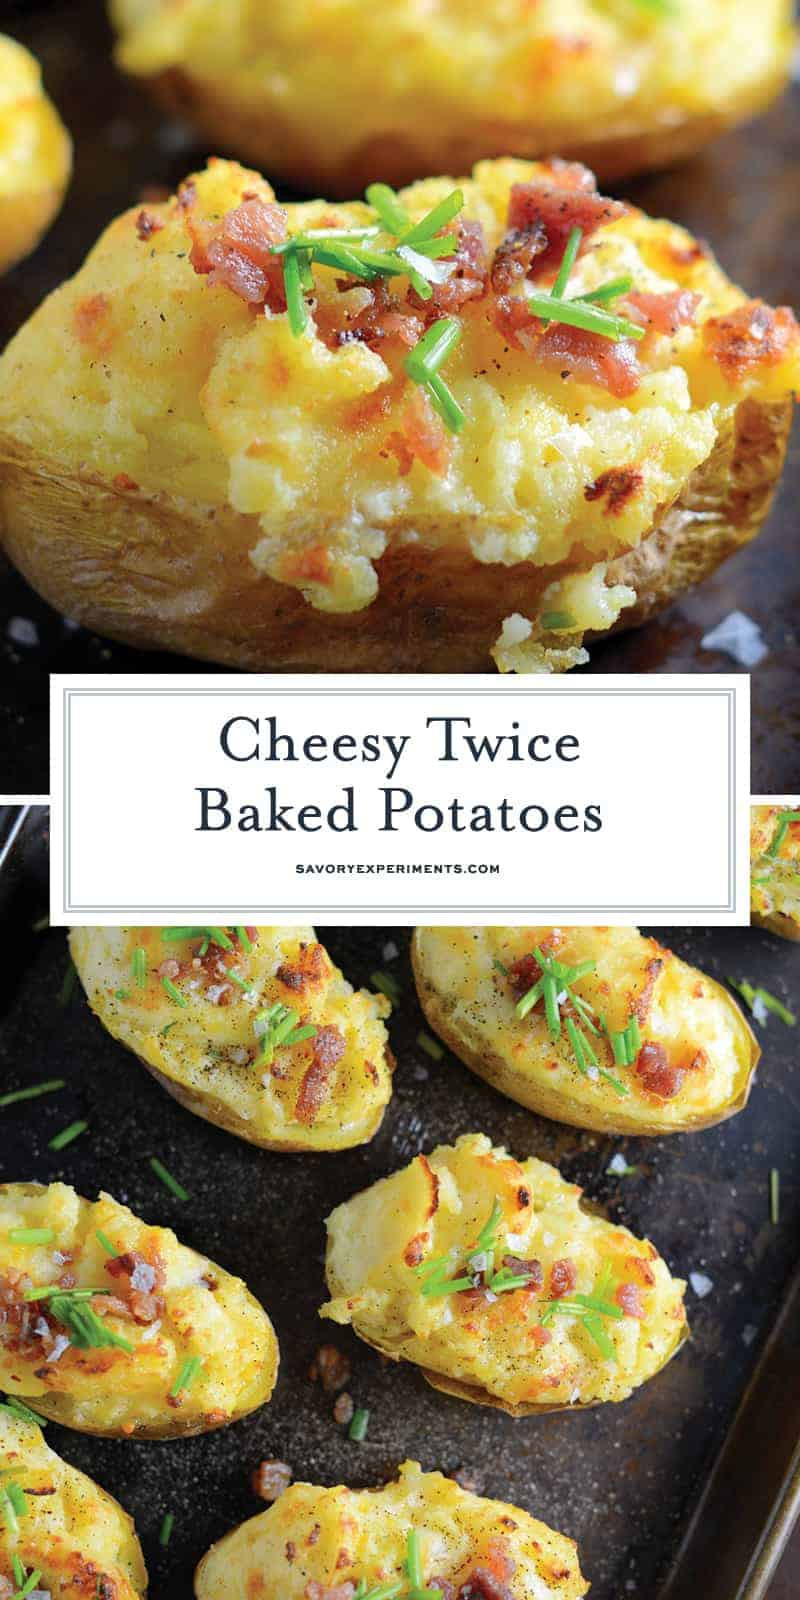 Side Dishes For Baked Potatoes
 Cheesy Twice Baked Potatoes